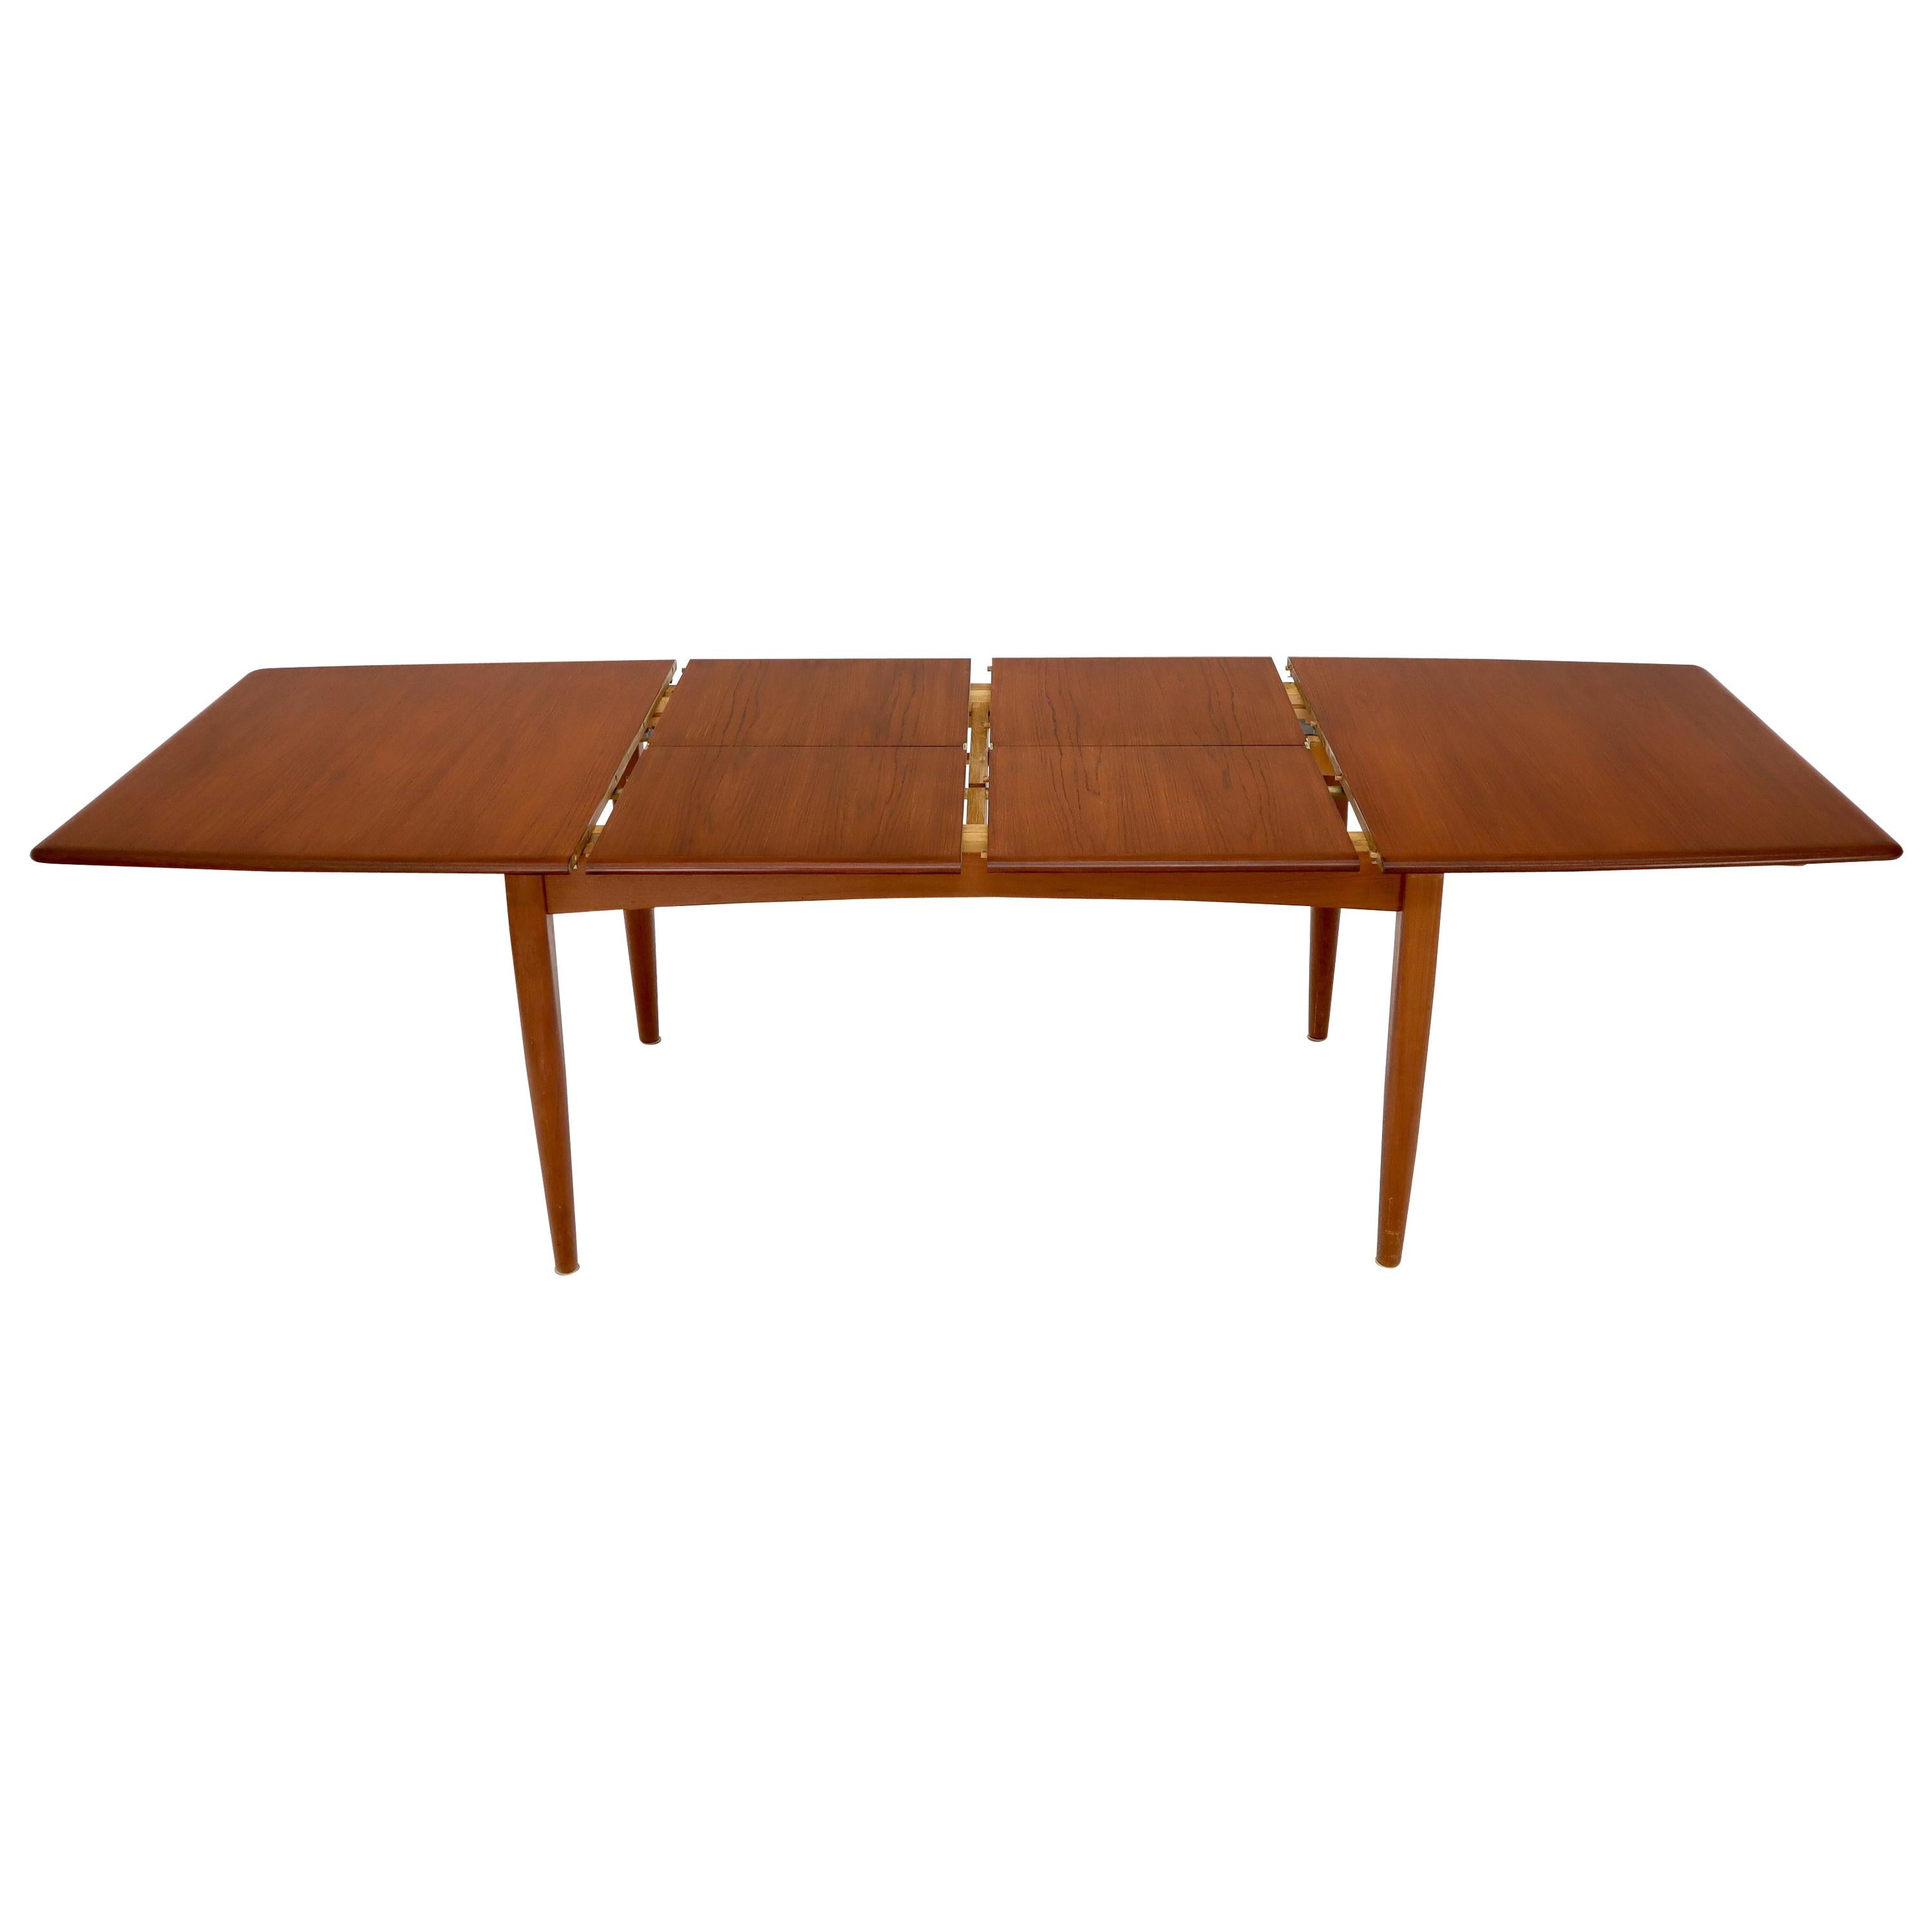 Danish Mid-Century Modern Teak Dining Table with Two Pop Up Self Storing Leaves For Sale